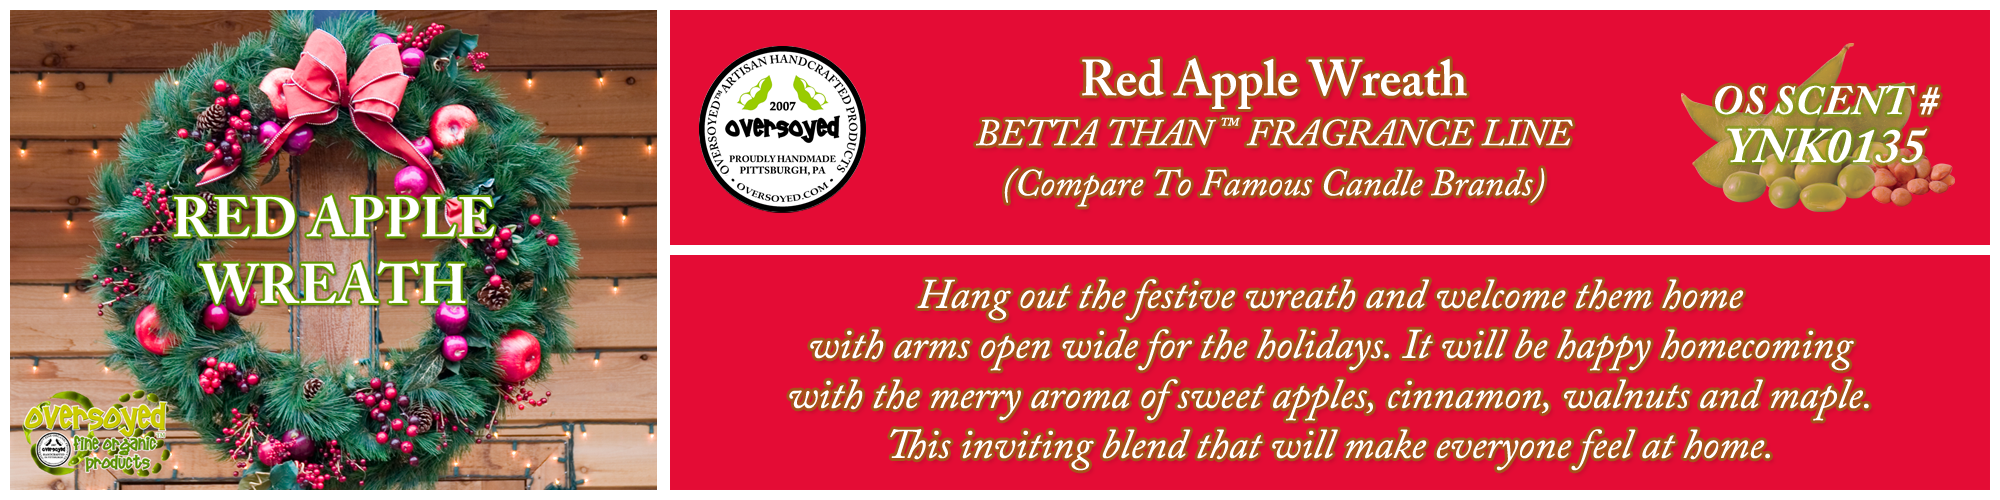 Red Apple Wreath Handcrafted Products Collection